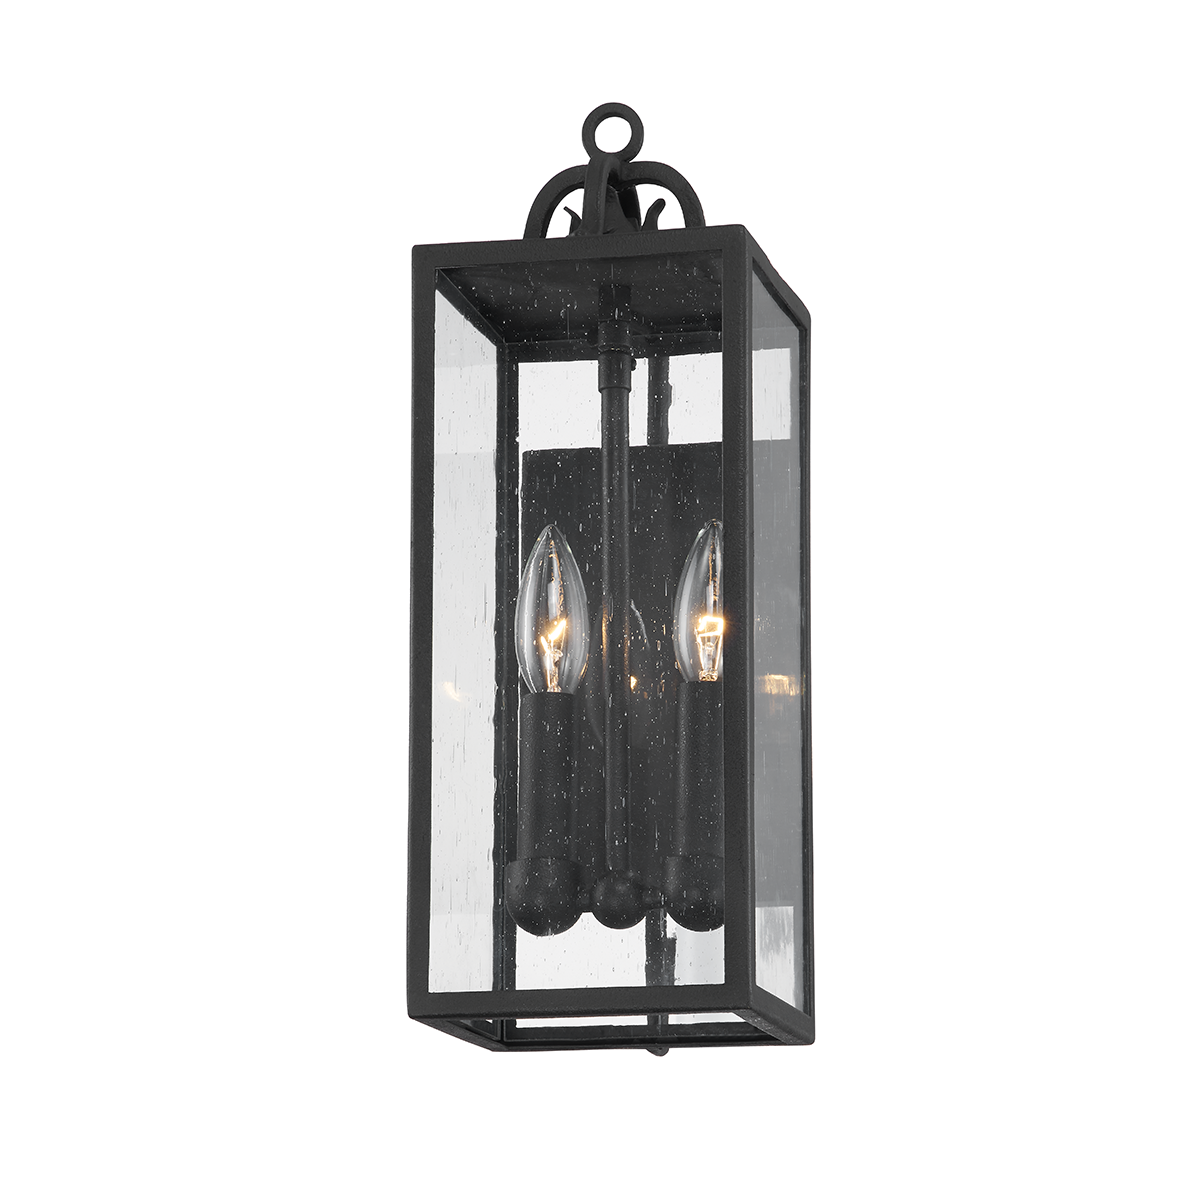 Troy CAIDEN 2 LIGHT EXTERIOR WALL SCONCE B2061 Outdoor l Wall Troy Lighting   